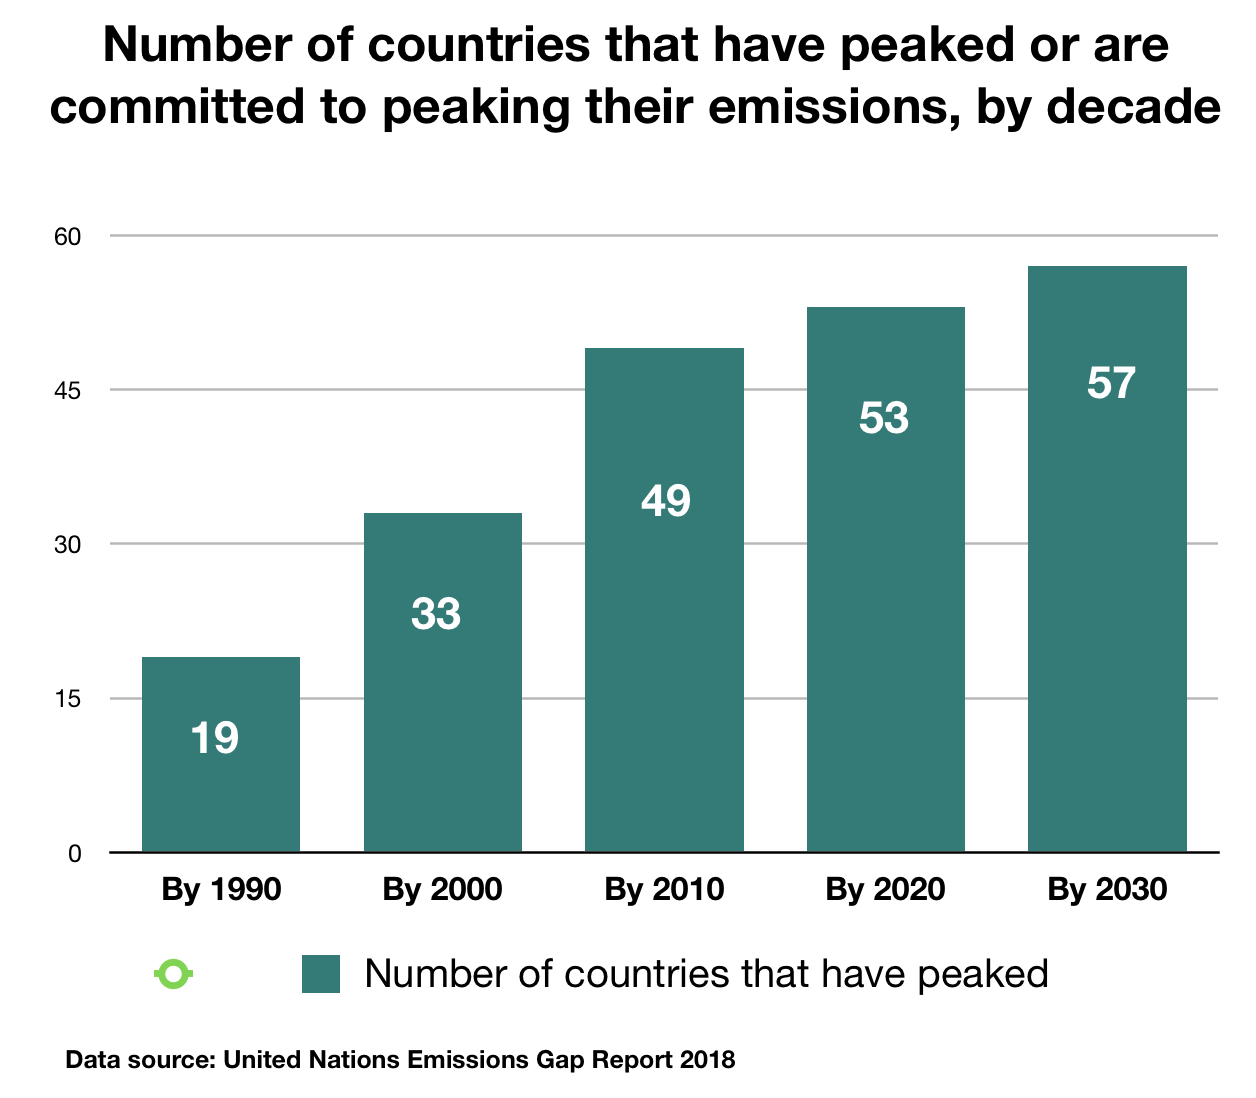 Number of countries that have peaked or are committed to peaking their emissions, by decade